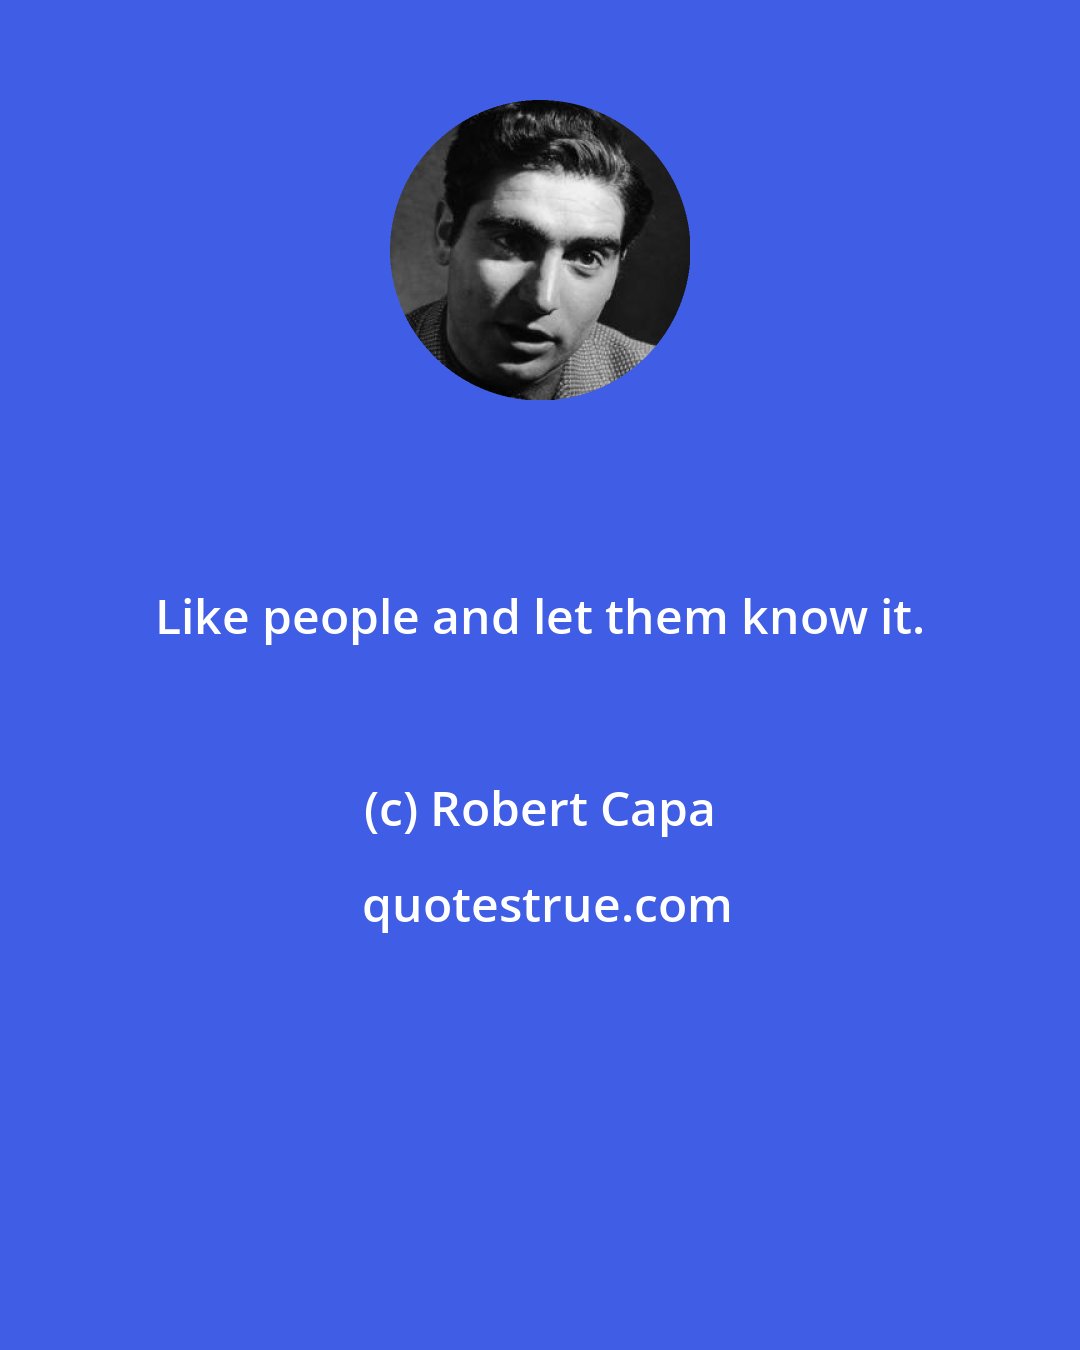 Robert Capa: Like people and let them know it.